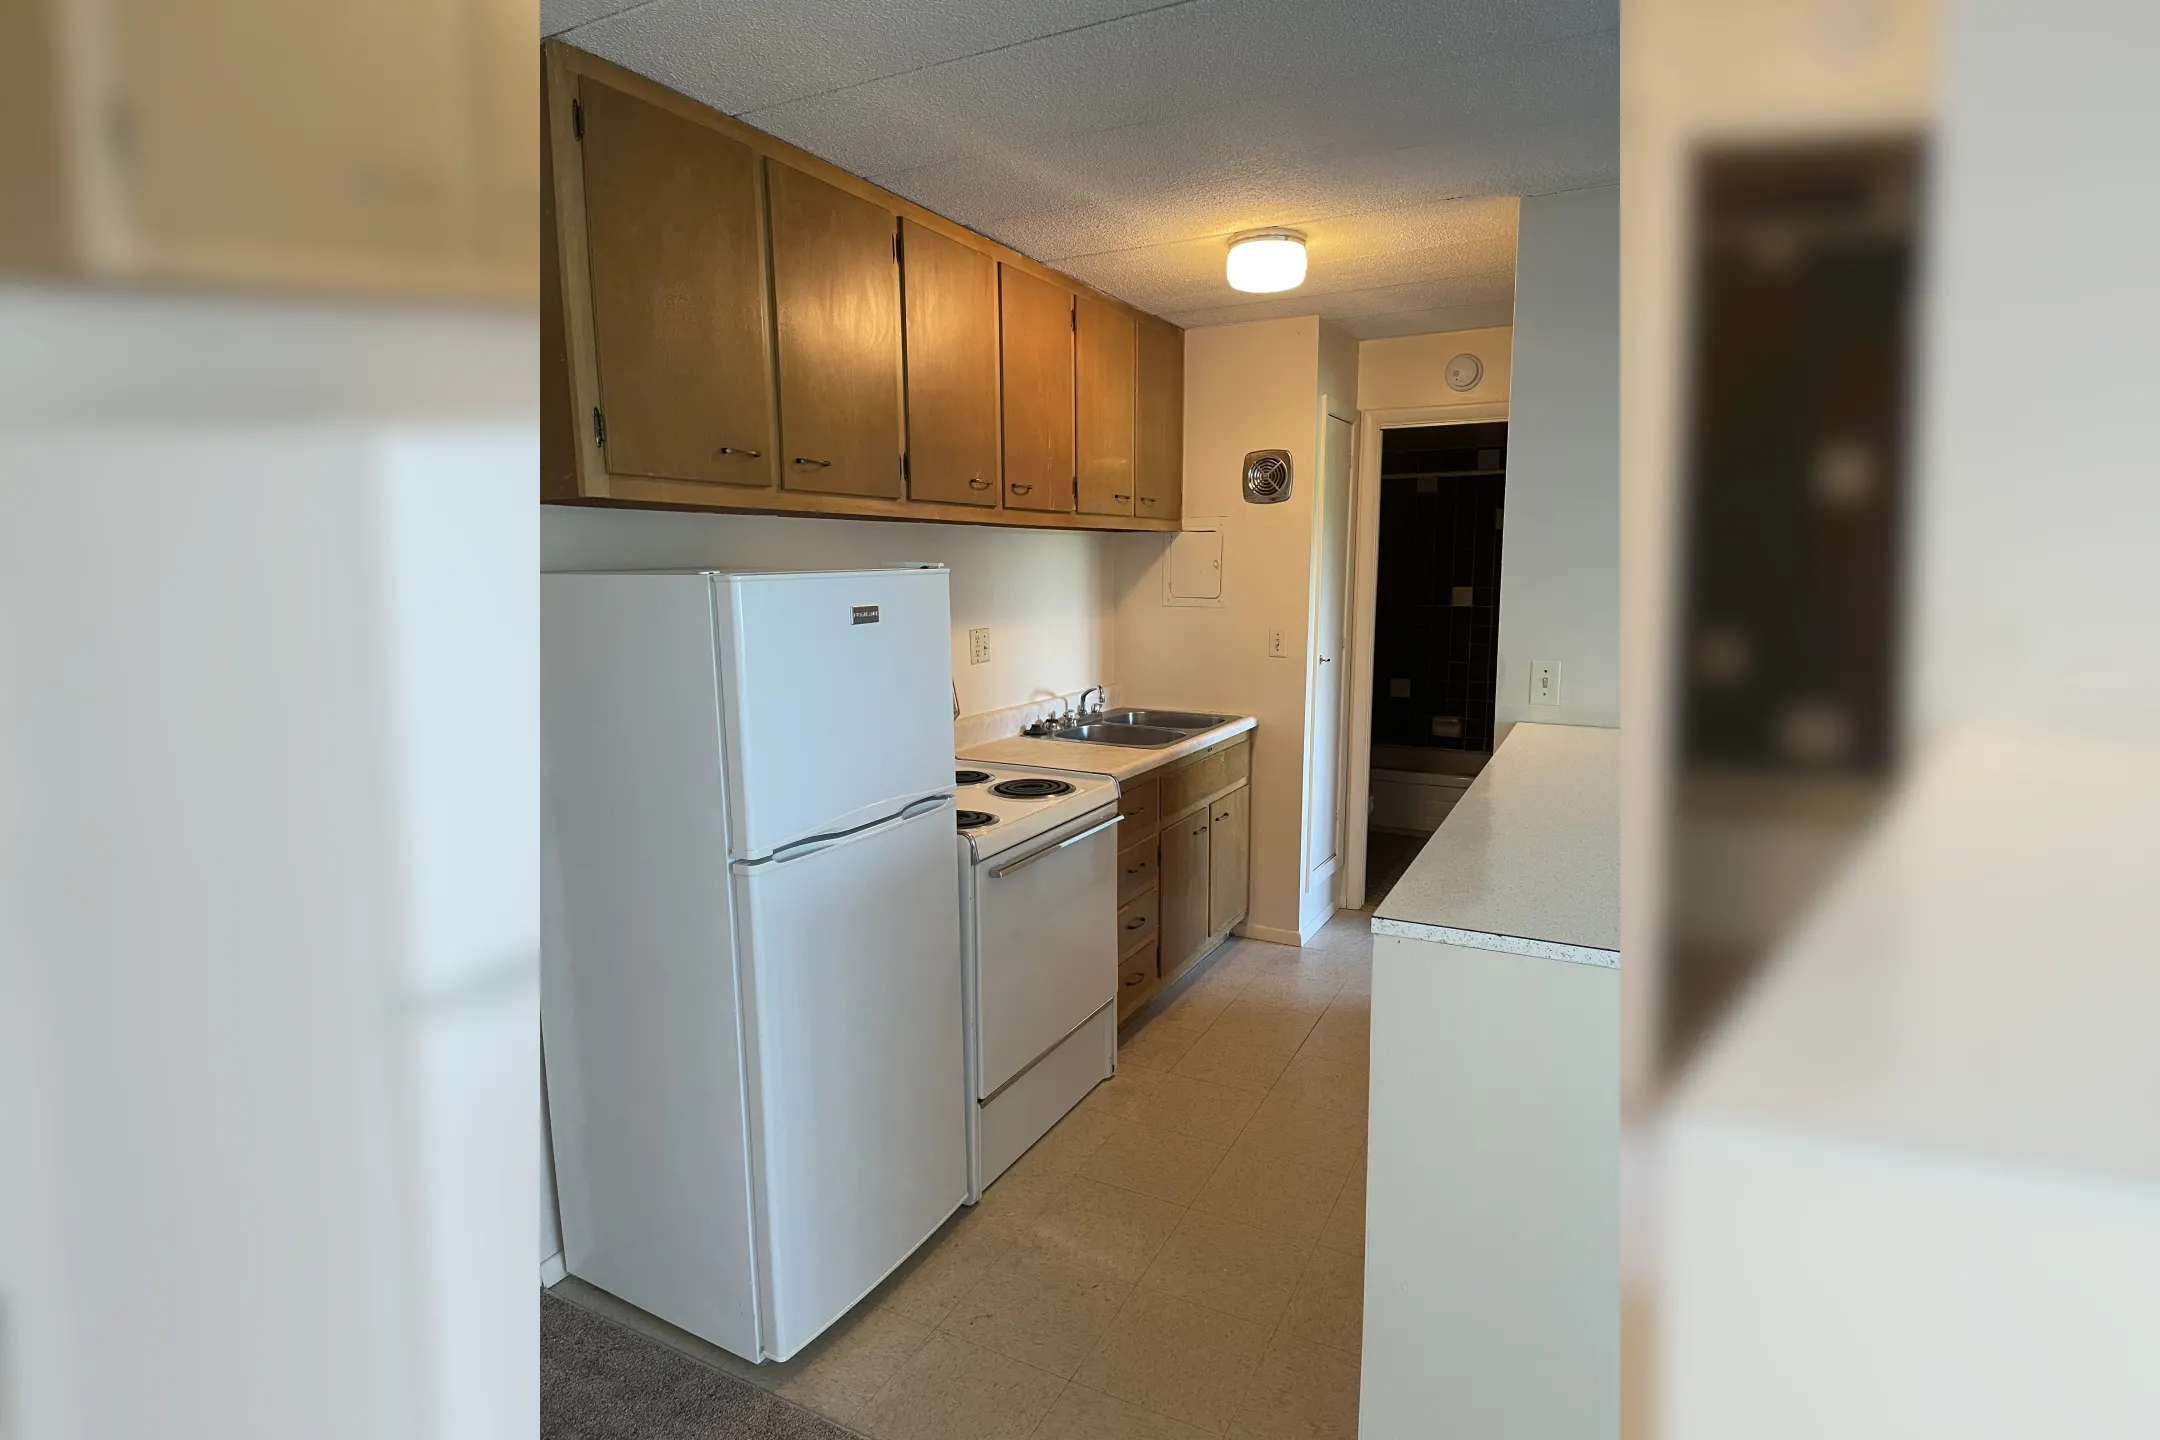 Kitchen - Commodore Club Apartments - Lakewood, OH